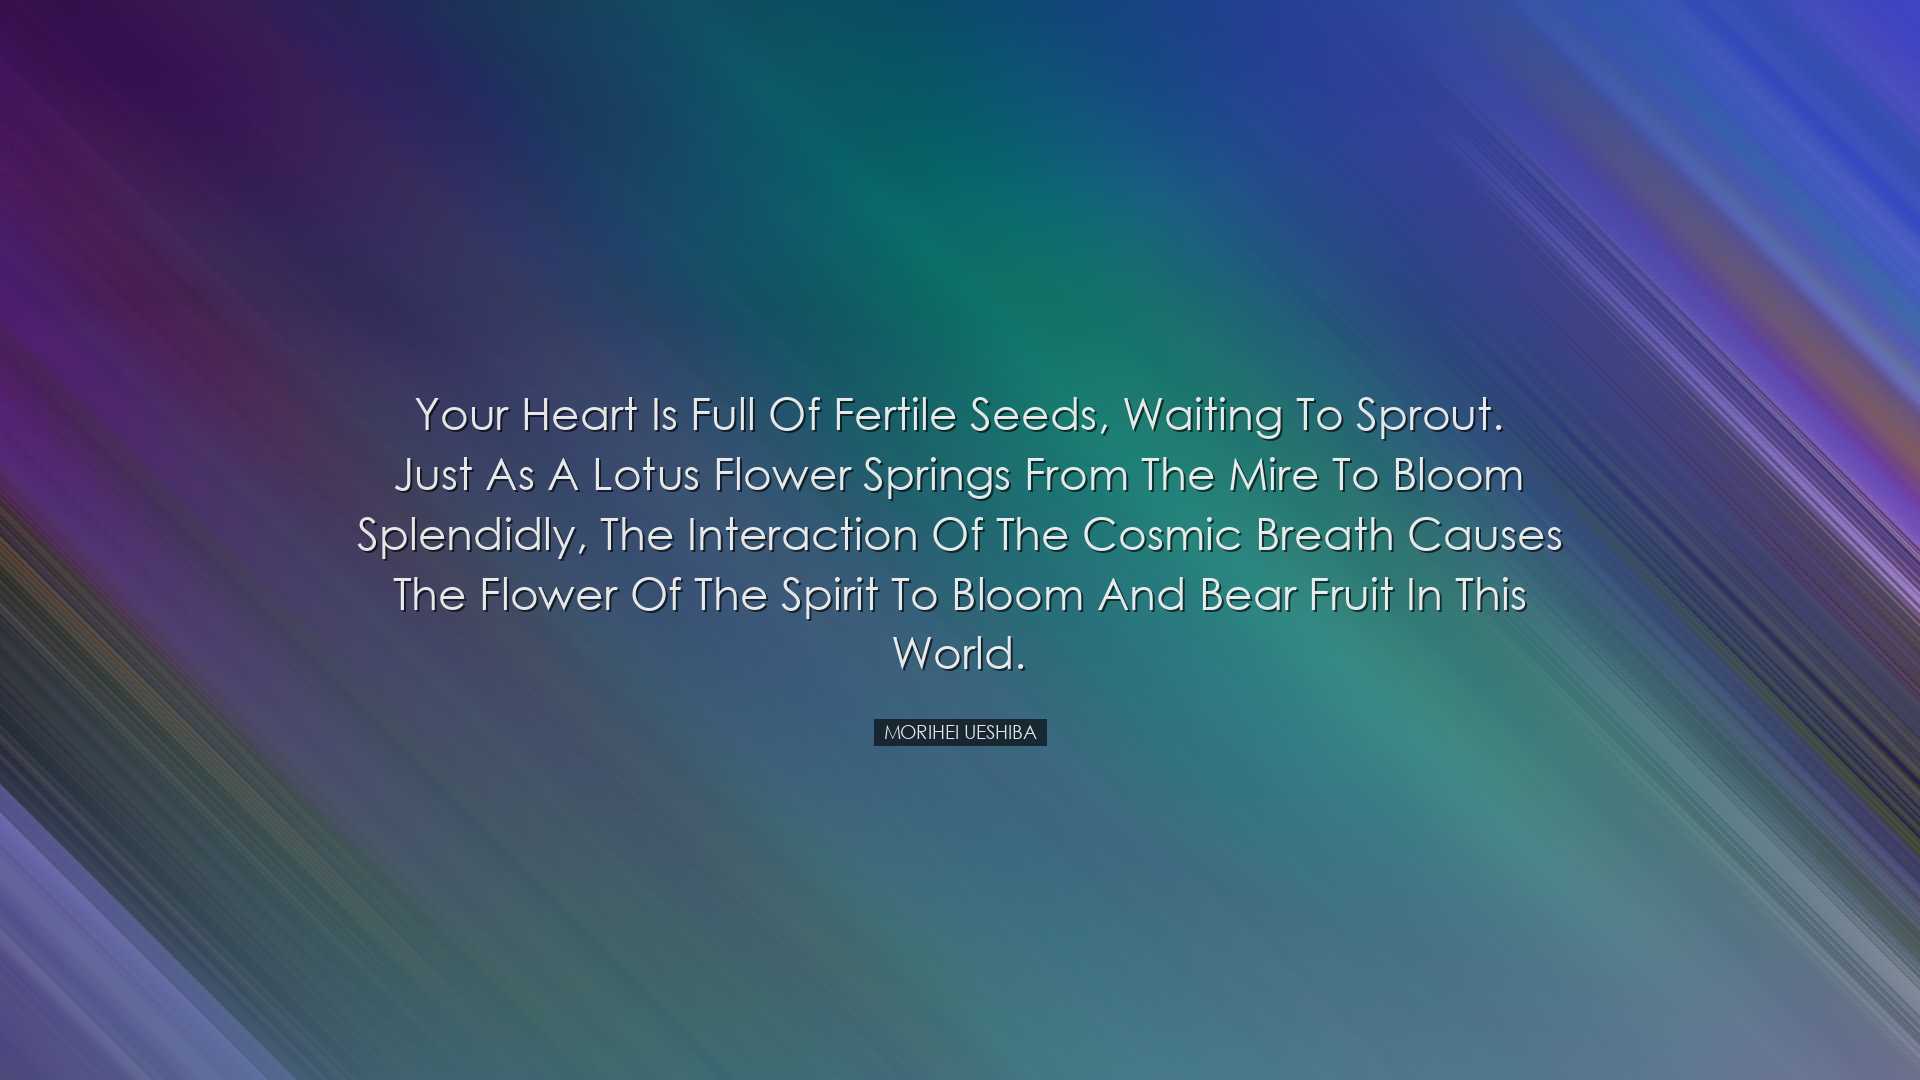 Your heart is full of fertile seeds, waiting to sprout. Just as a